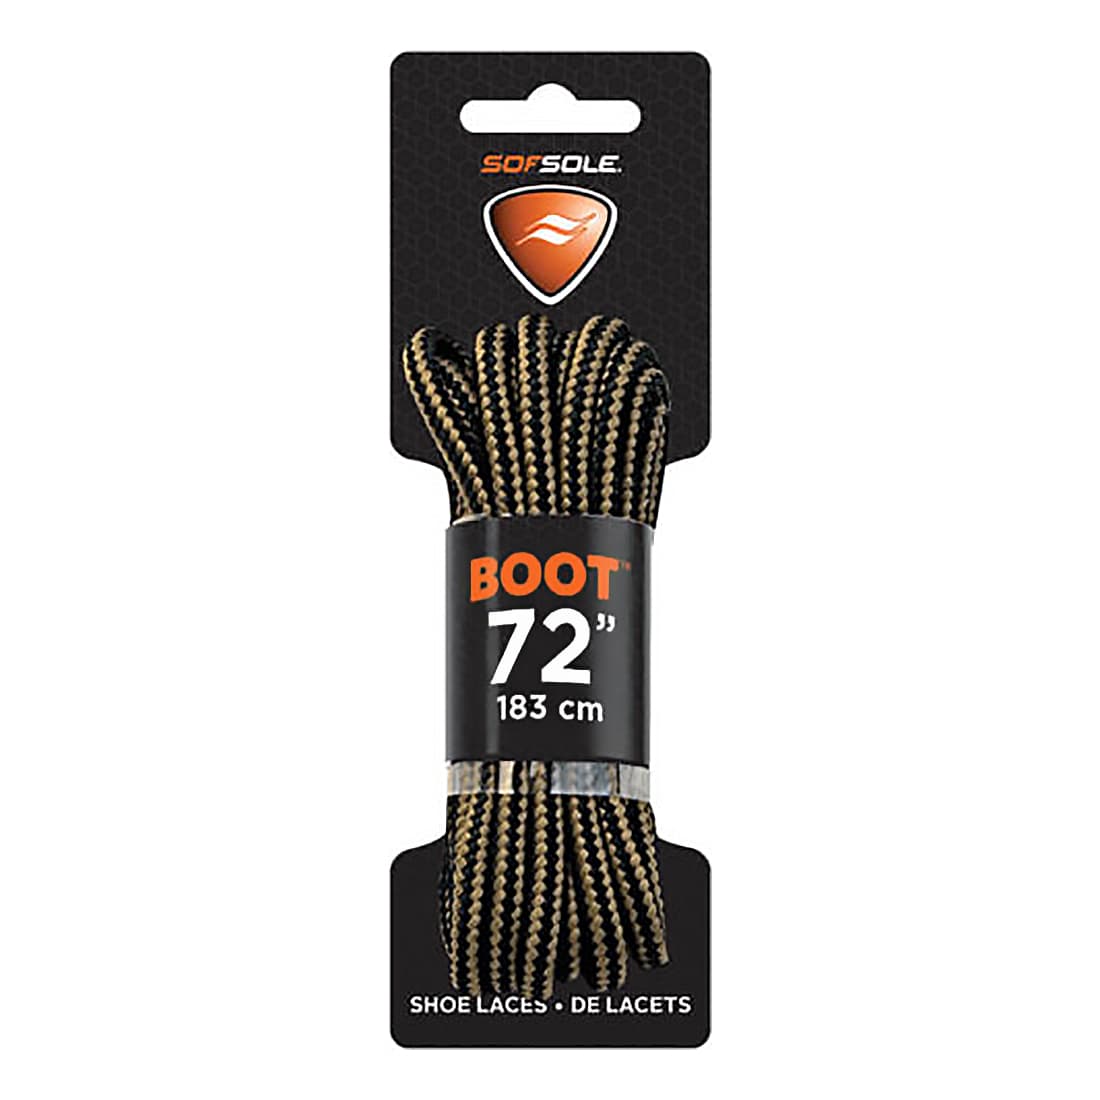 Sof Sole Waxed Boot Laces - 72" - Black/Tan